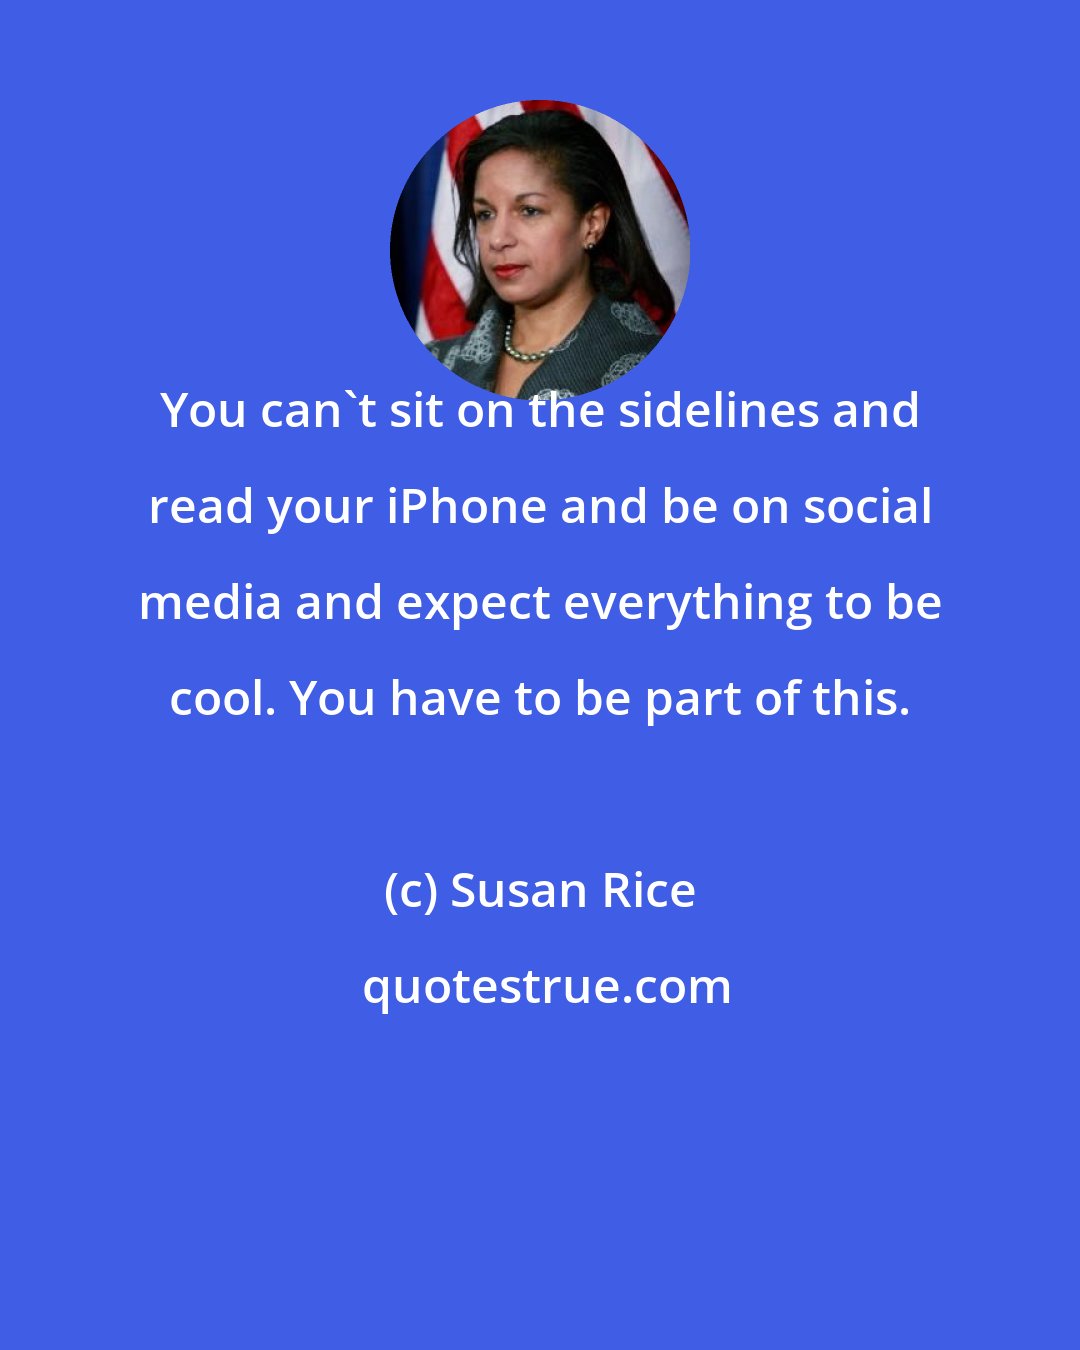 Susan Rice: You can't sit on the sidelines and read your iPhone and be on social media and expect everything to be cool. You have to be part of this.